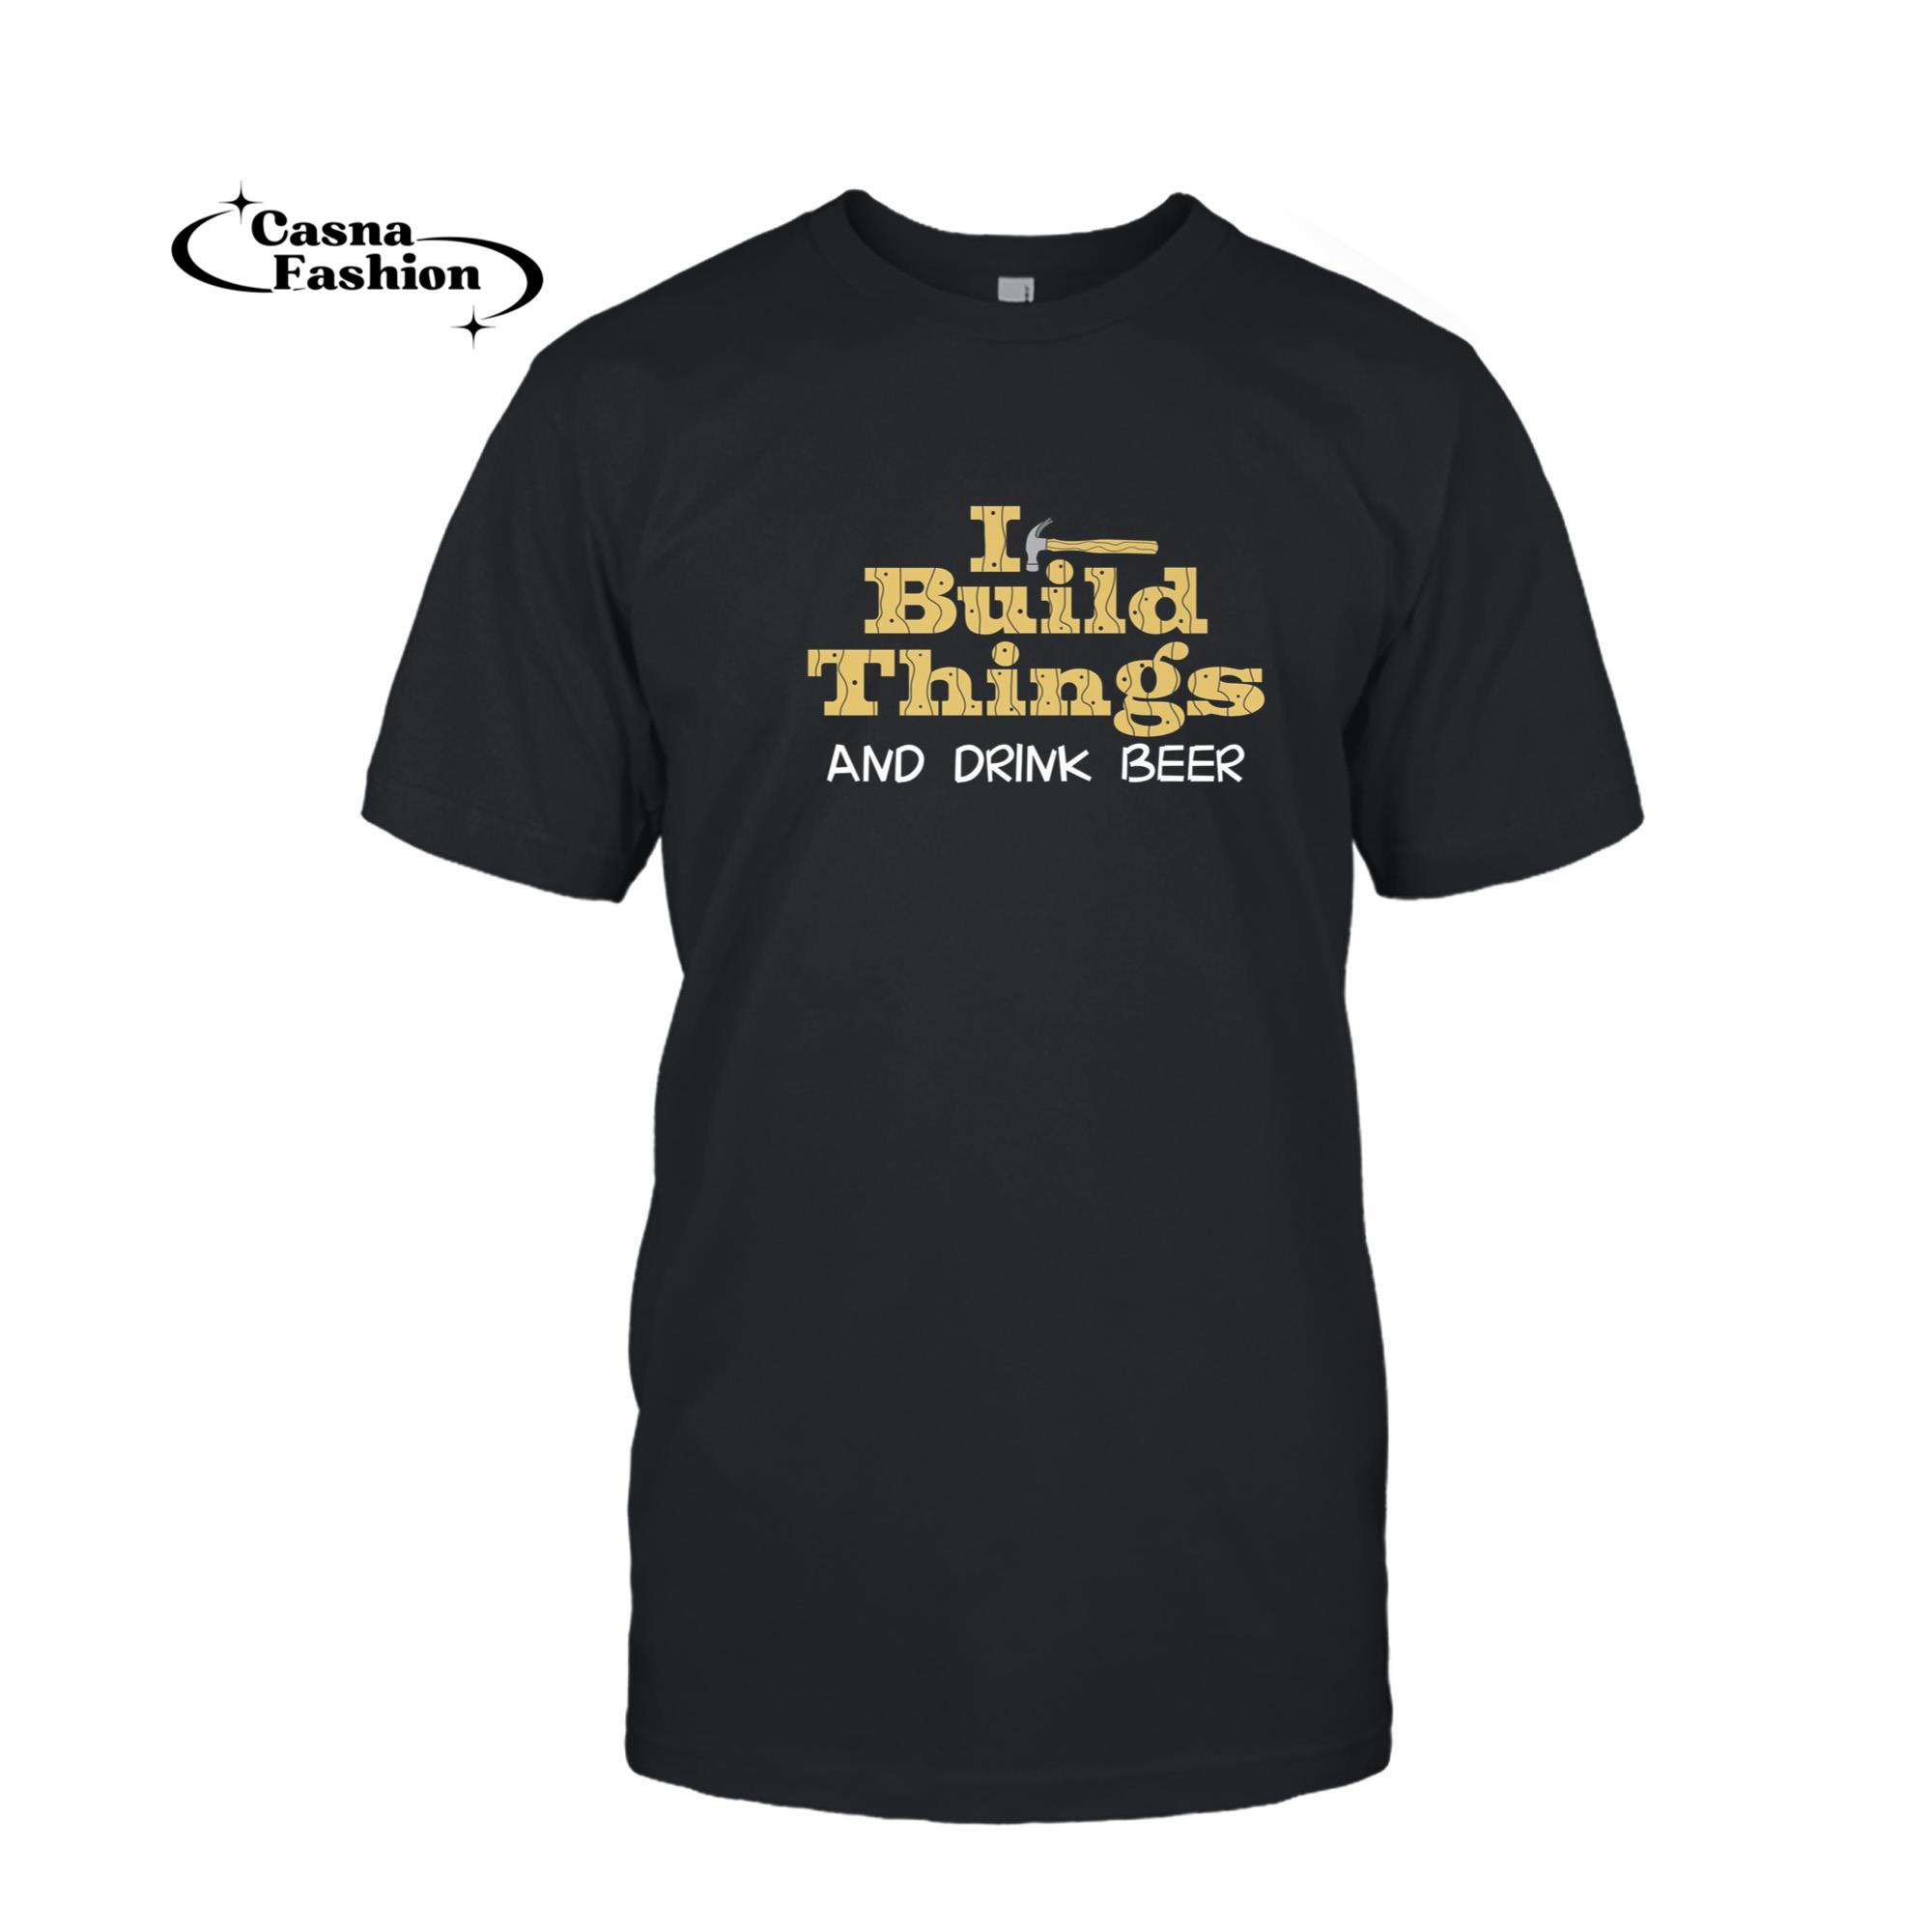 casnafashion_T-shirt_I Build Things And Drink Beer Funny Woodworker Construction Premium T-Shirt_T-shirt_Black